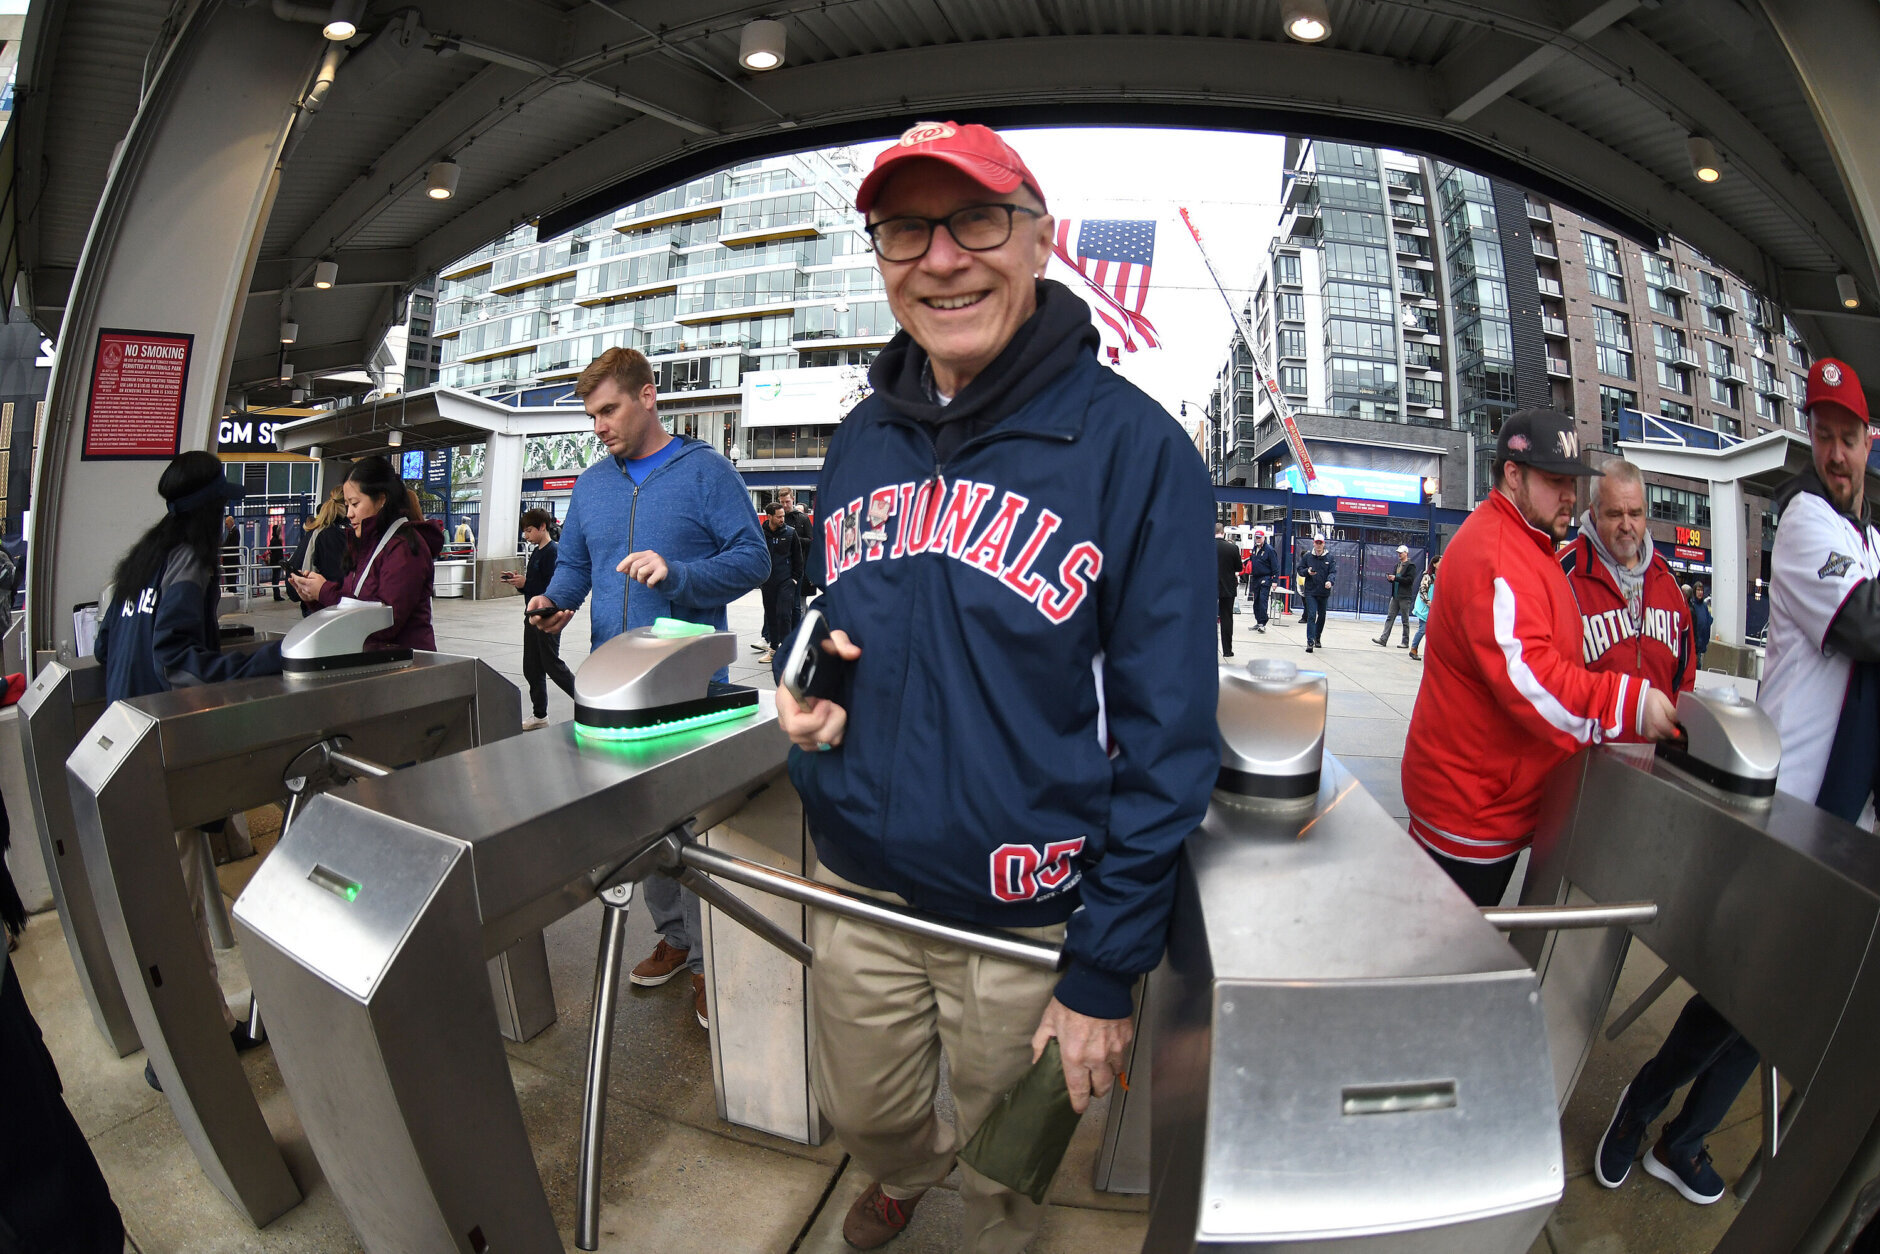 WASHINGTON, DC - APRIL 07:  A Washington Nationals fan enters the ballpark before the game against the New York Mets on Opening Day at the Nationals Park on April 7, 2022 in Washington, DC.  (Photo by Mitchell Layton/Getty Images)